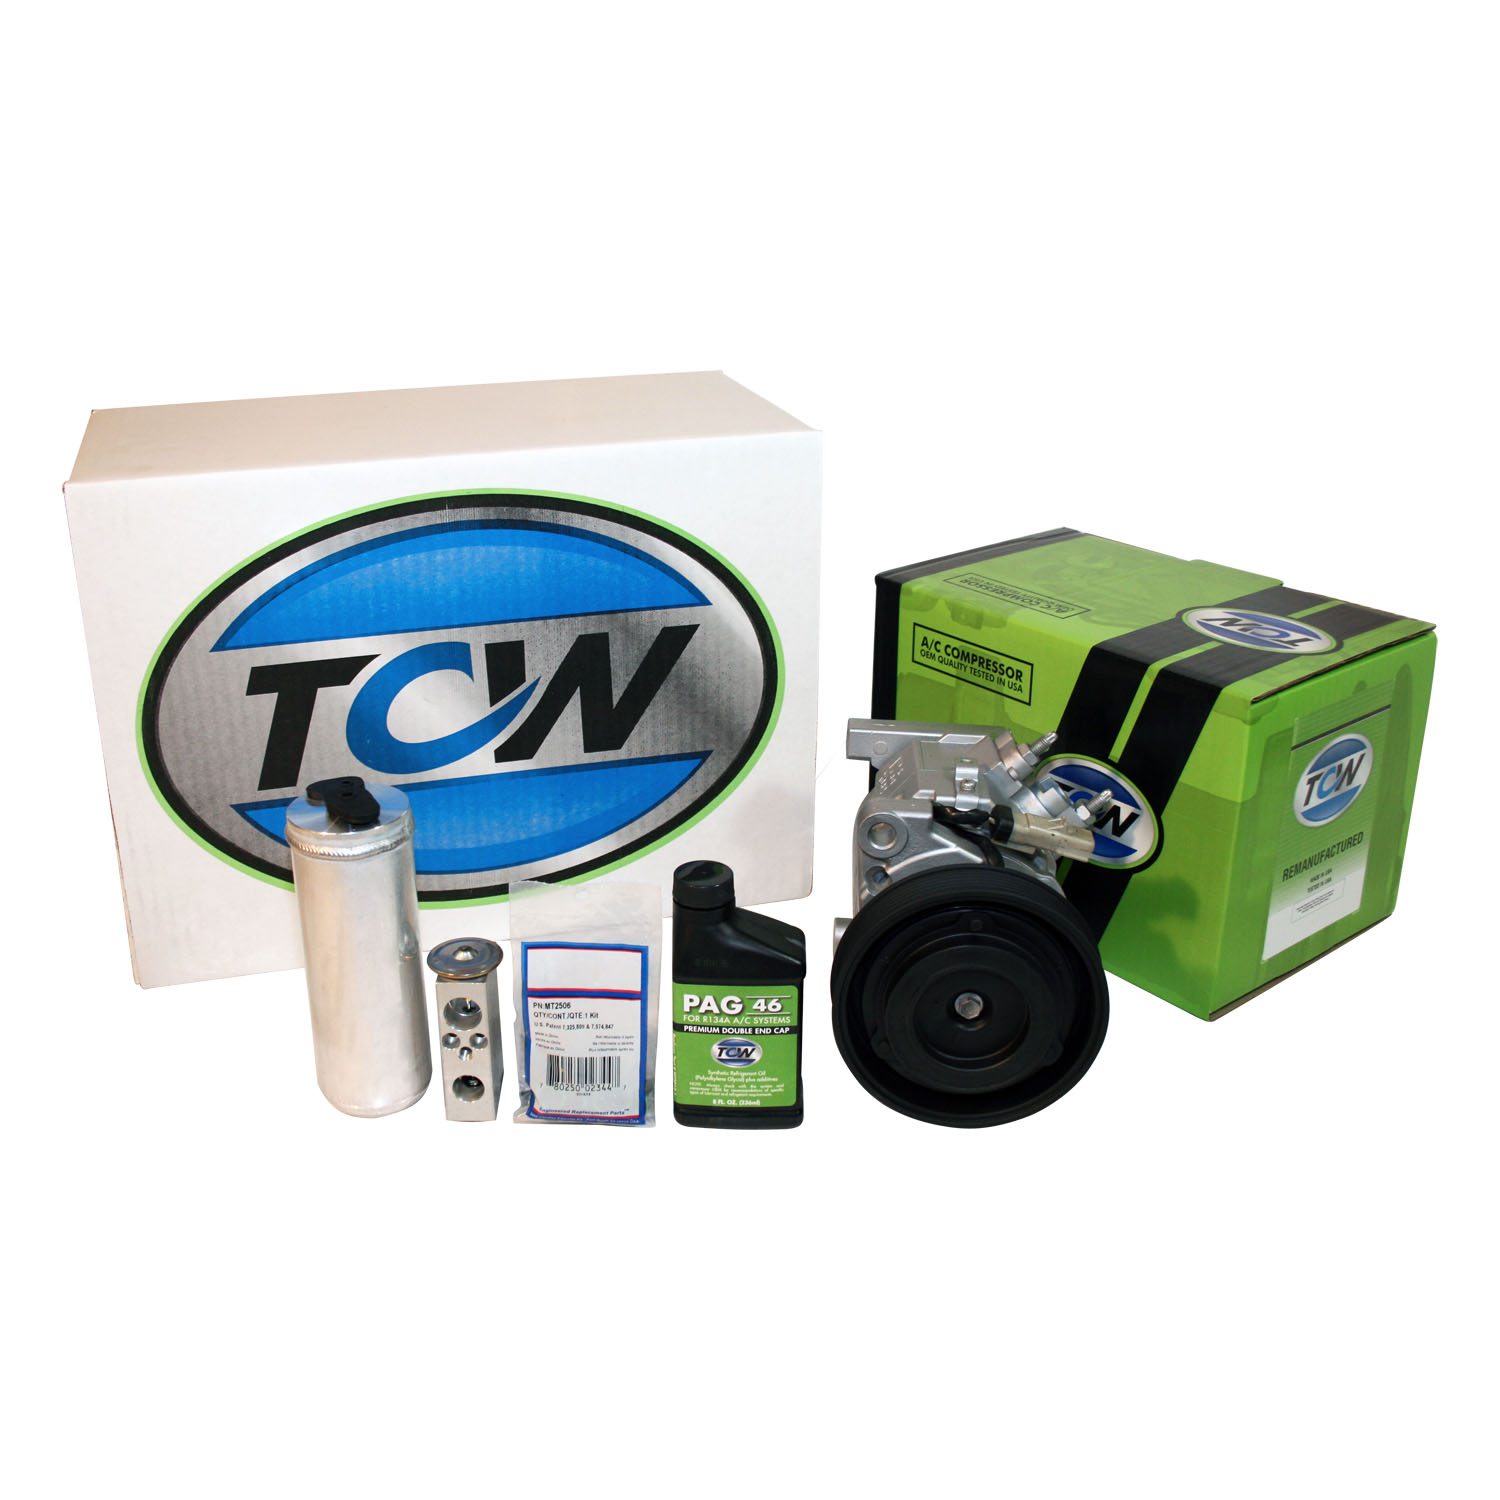 TCW Vehicle A/C Kit K1000209R Remanufactured Product Image field_60b6a13a6e67c